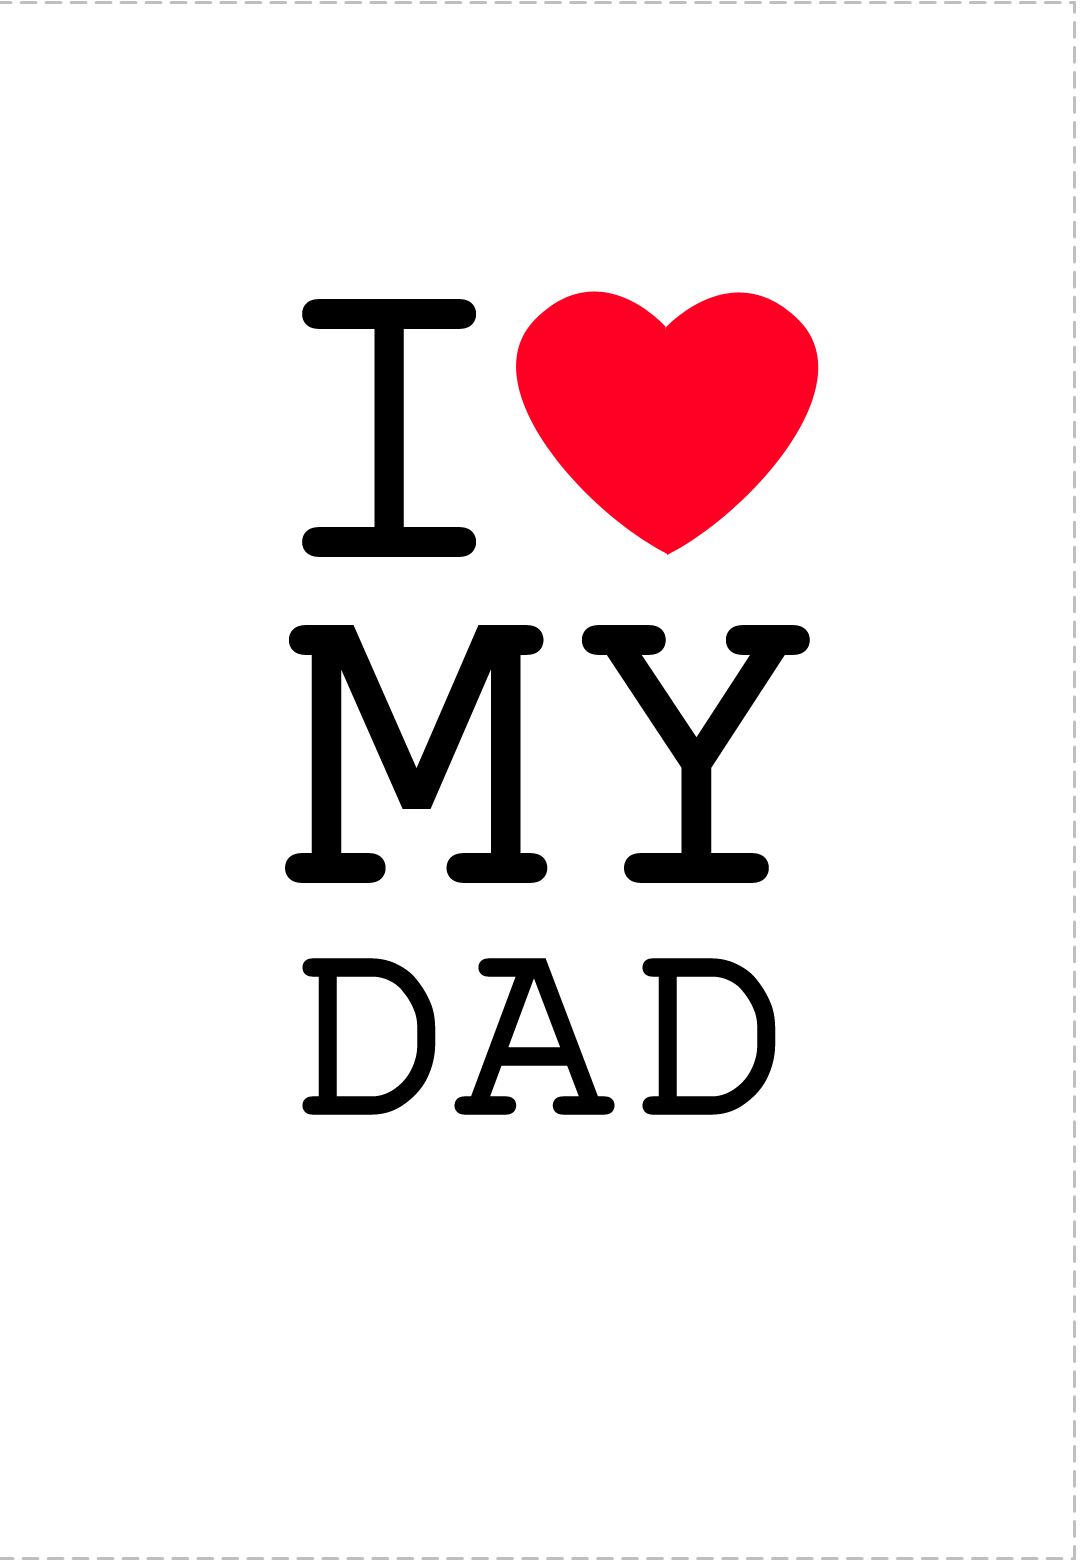 I Love U Mom and Dad Quotes. Love quotes collection within HD image